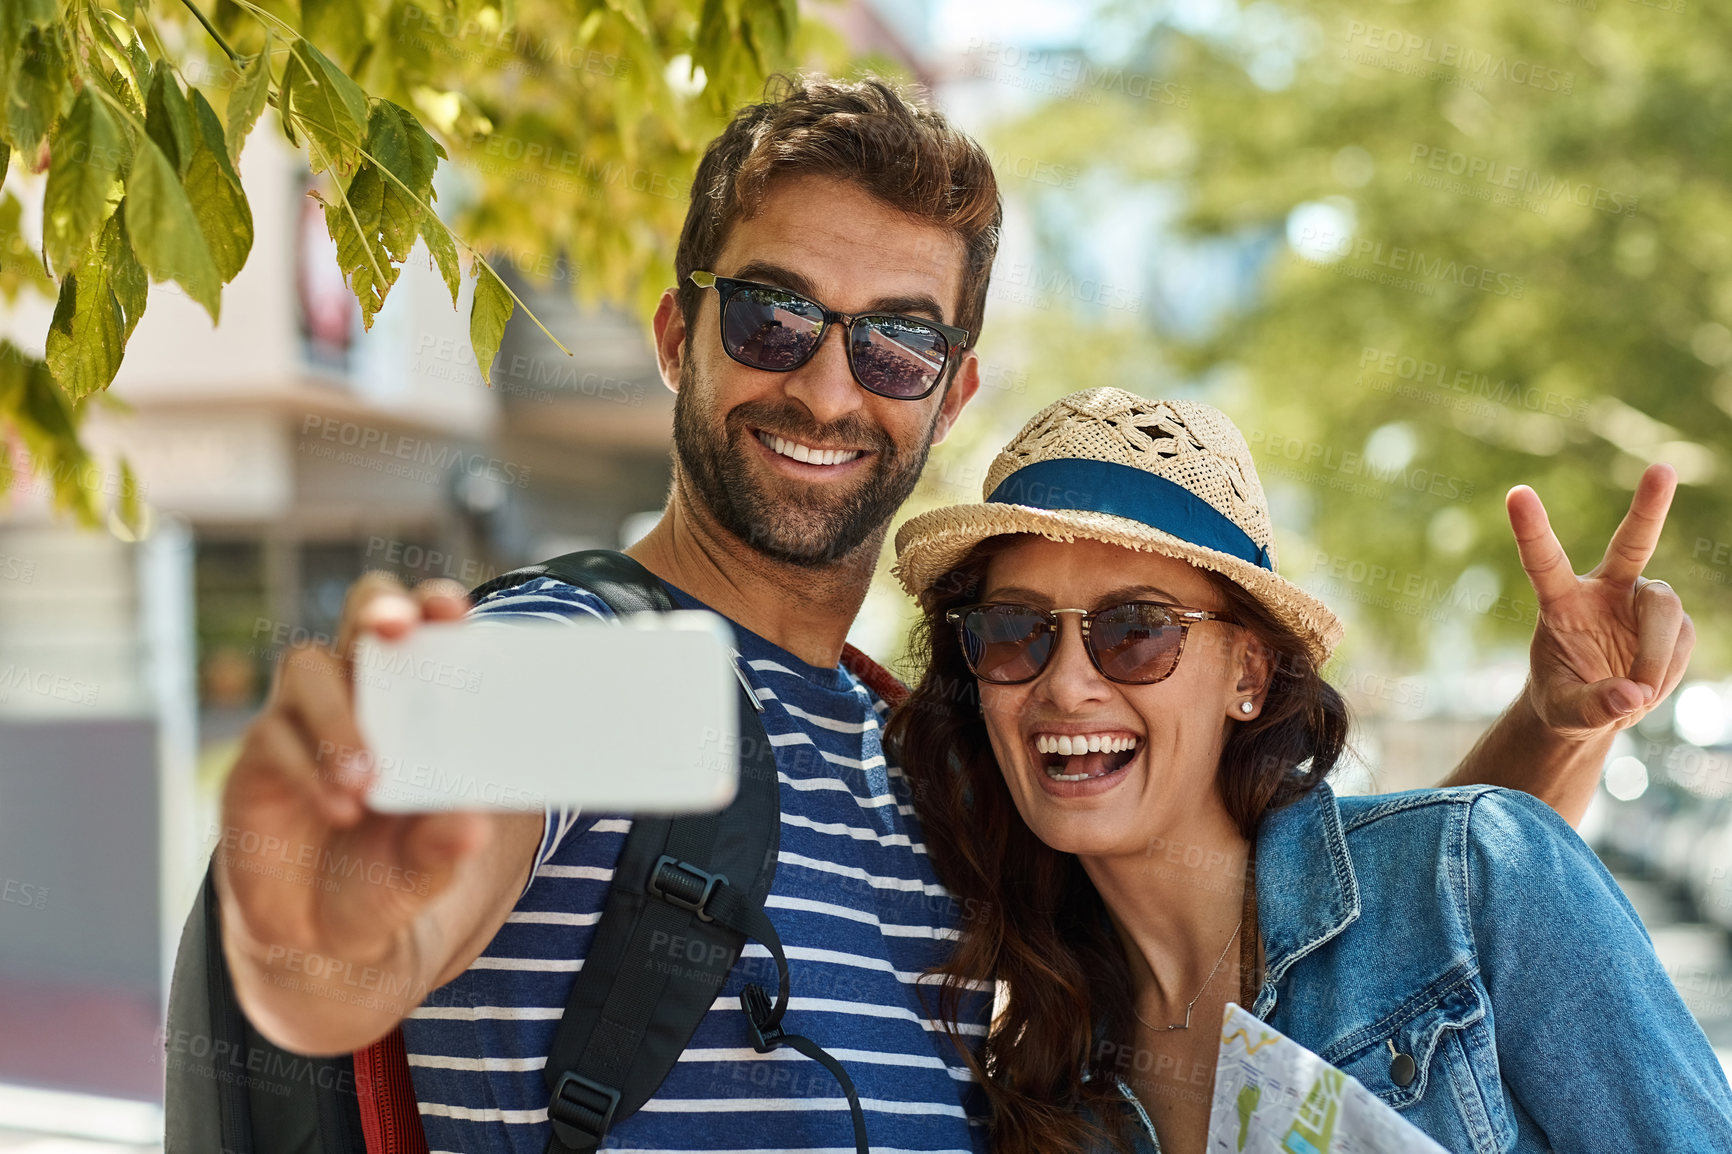 Buy stock photo Shot of a happy tourist couple posing for a selfie while exploring a foreign city together